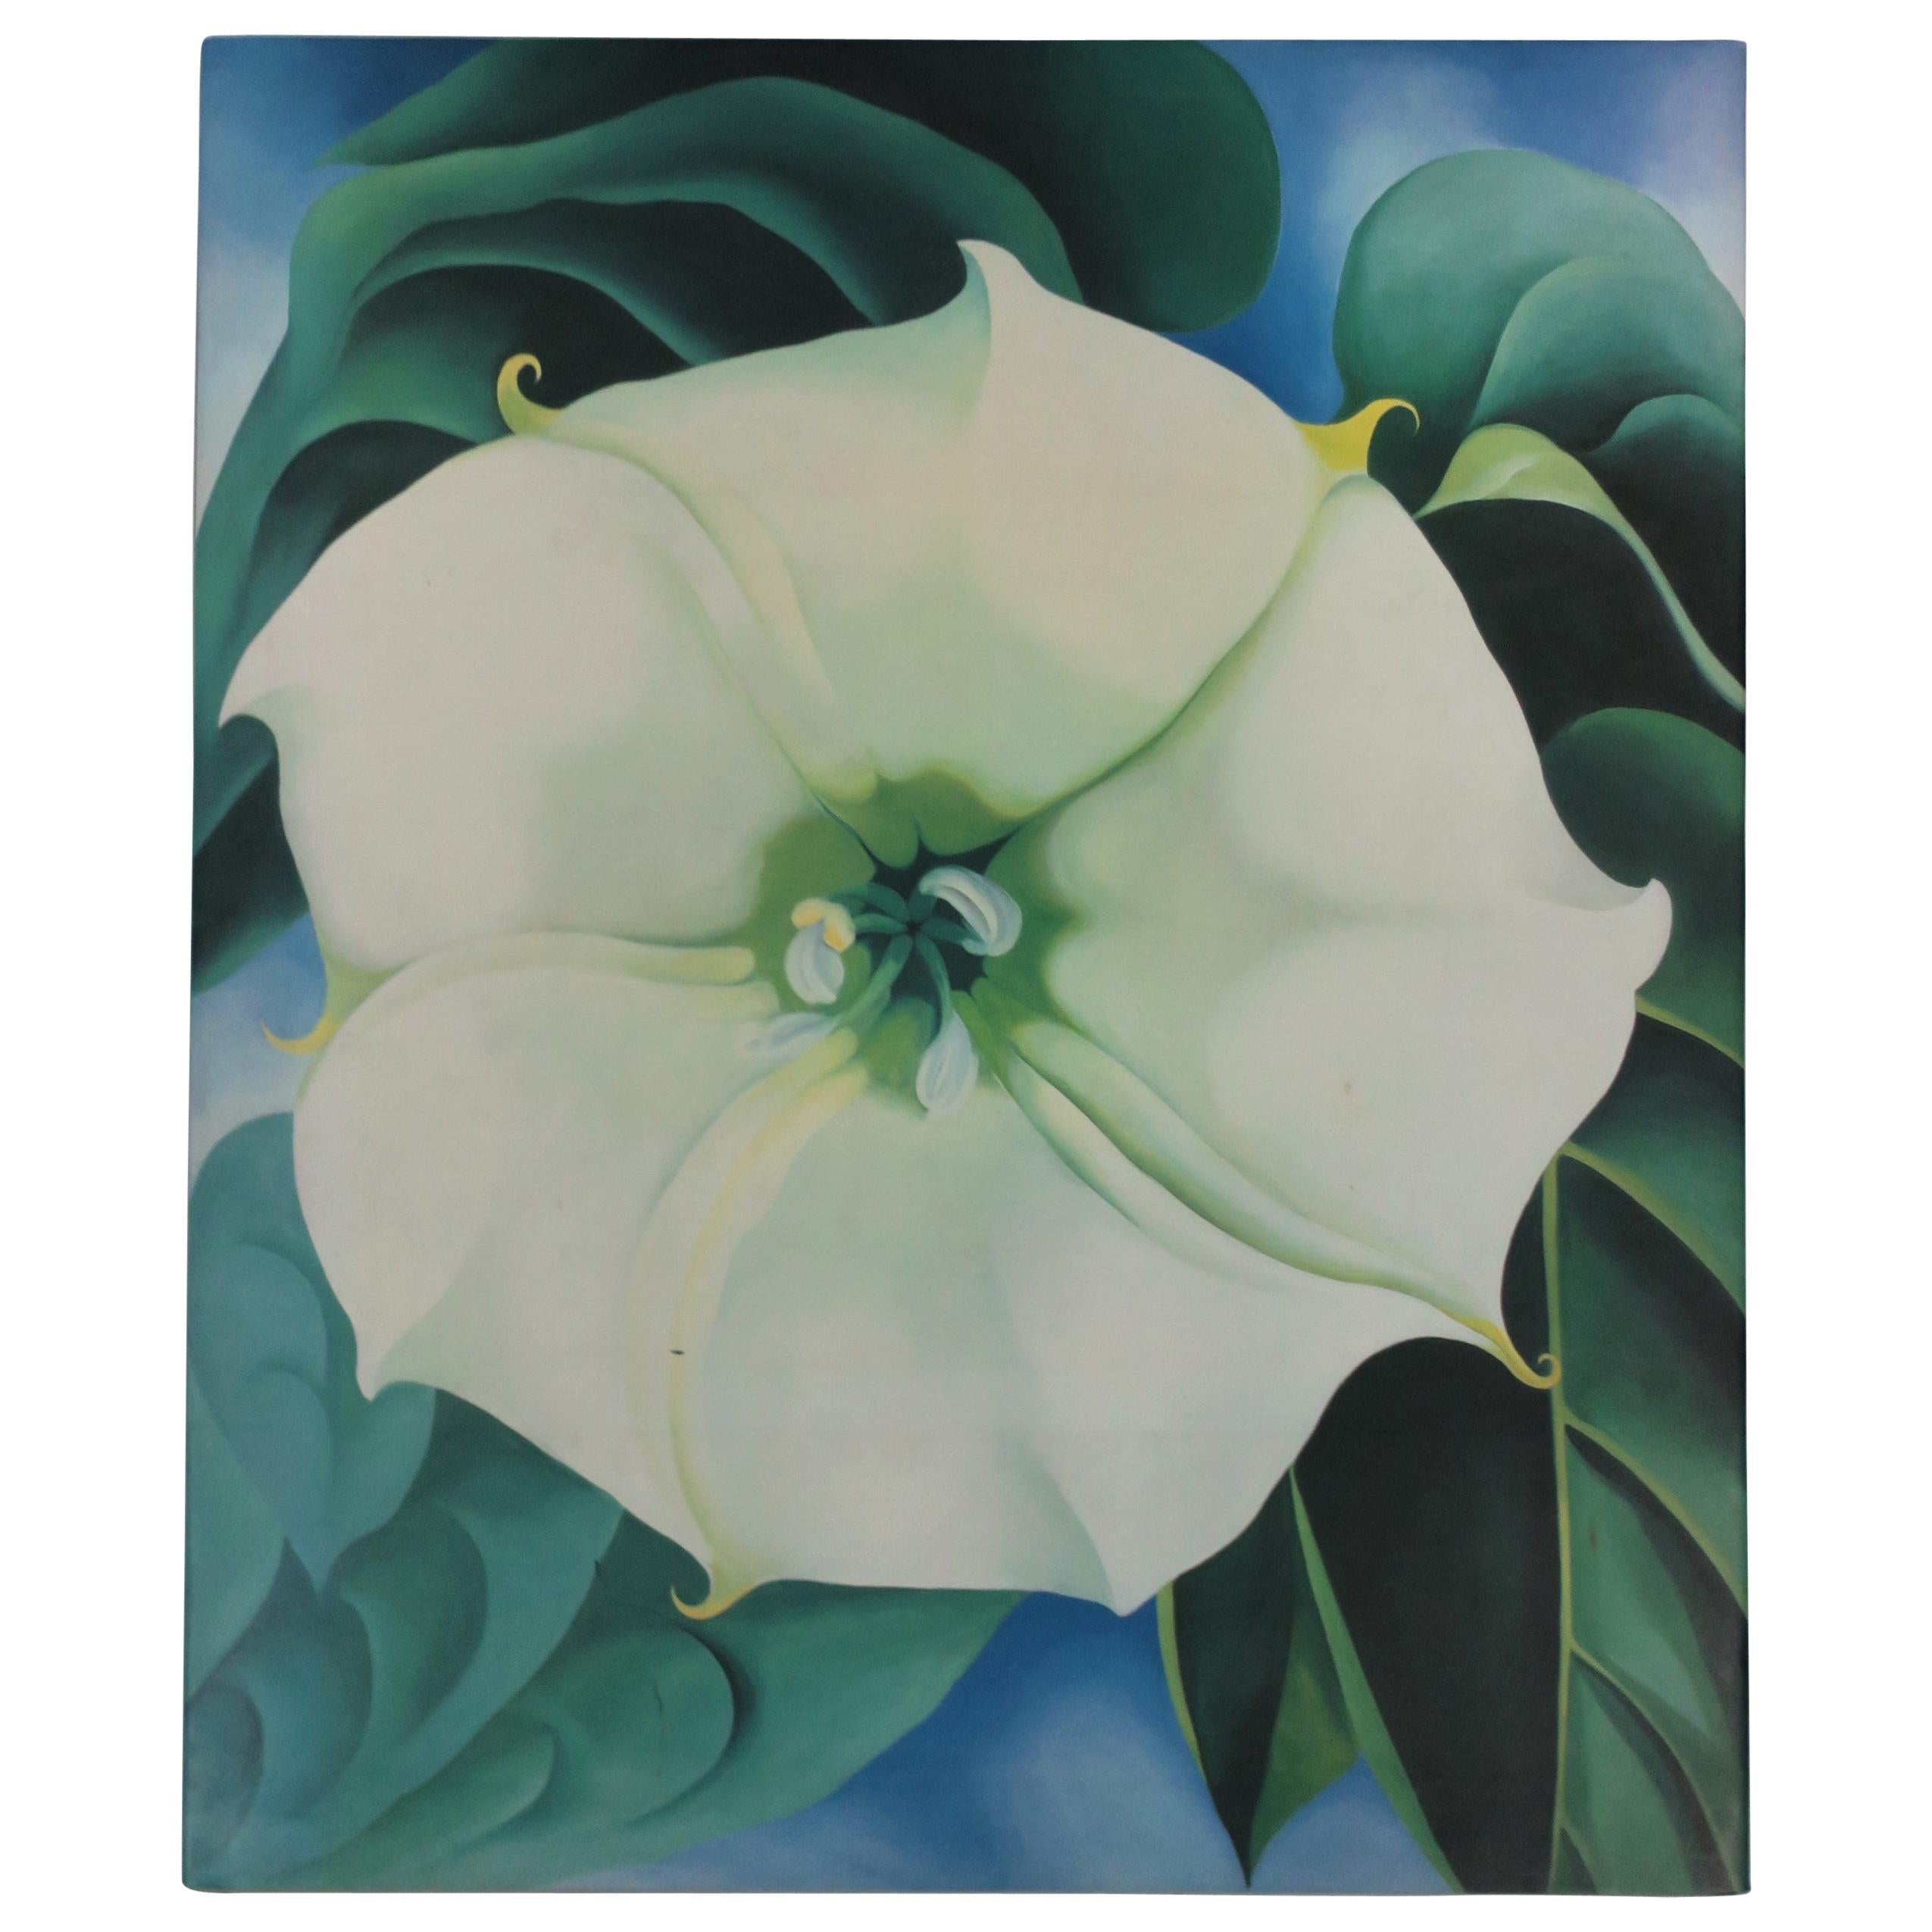 Georgia O'Keeffe, 'One Hundred Flowers', Coffee Table or Library Book, 1980s